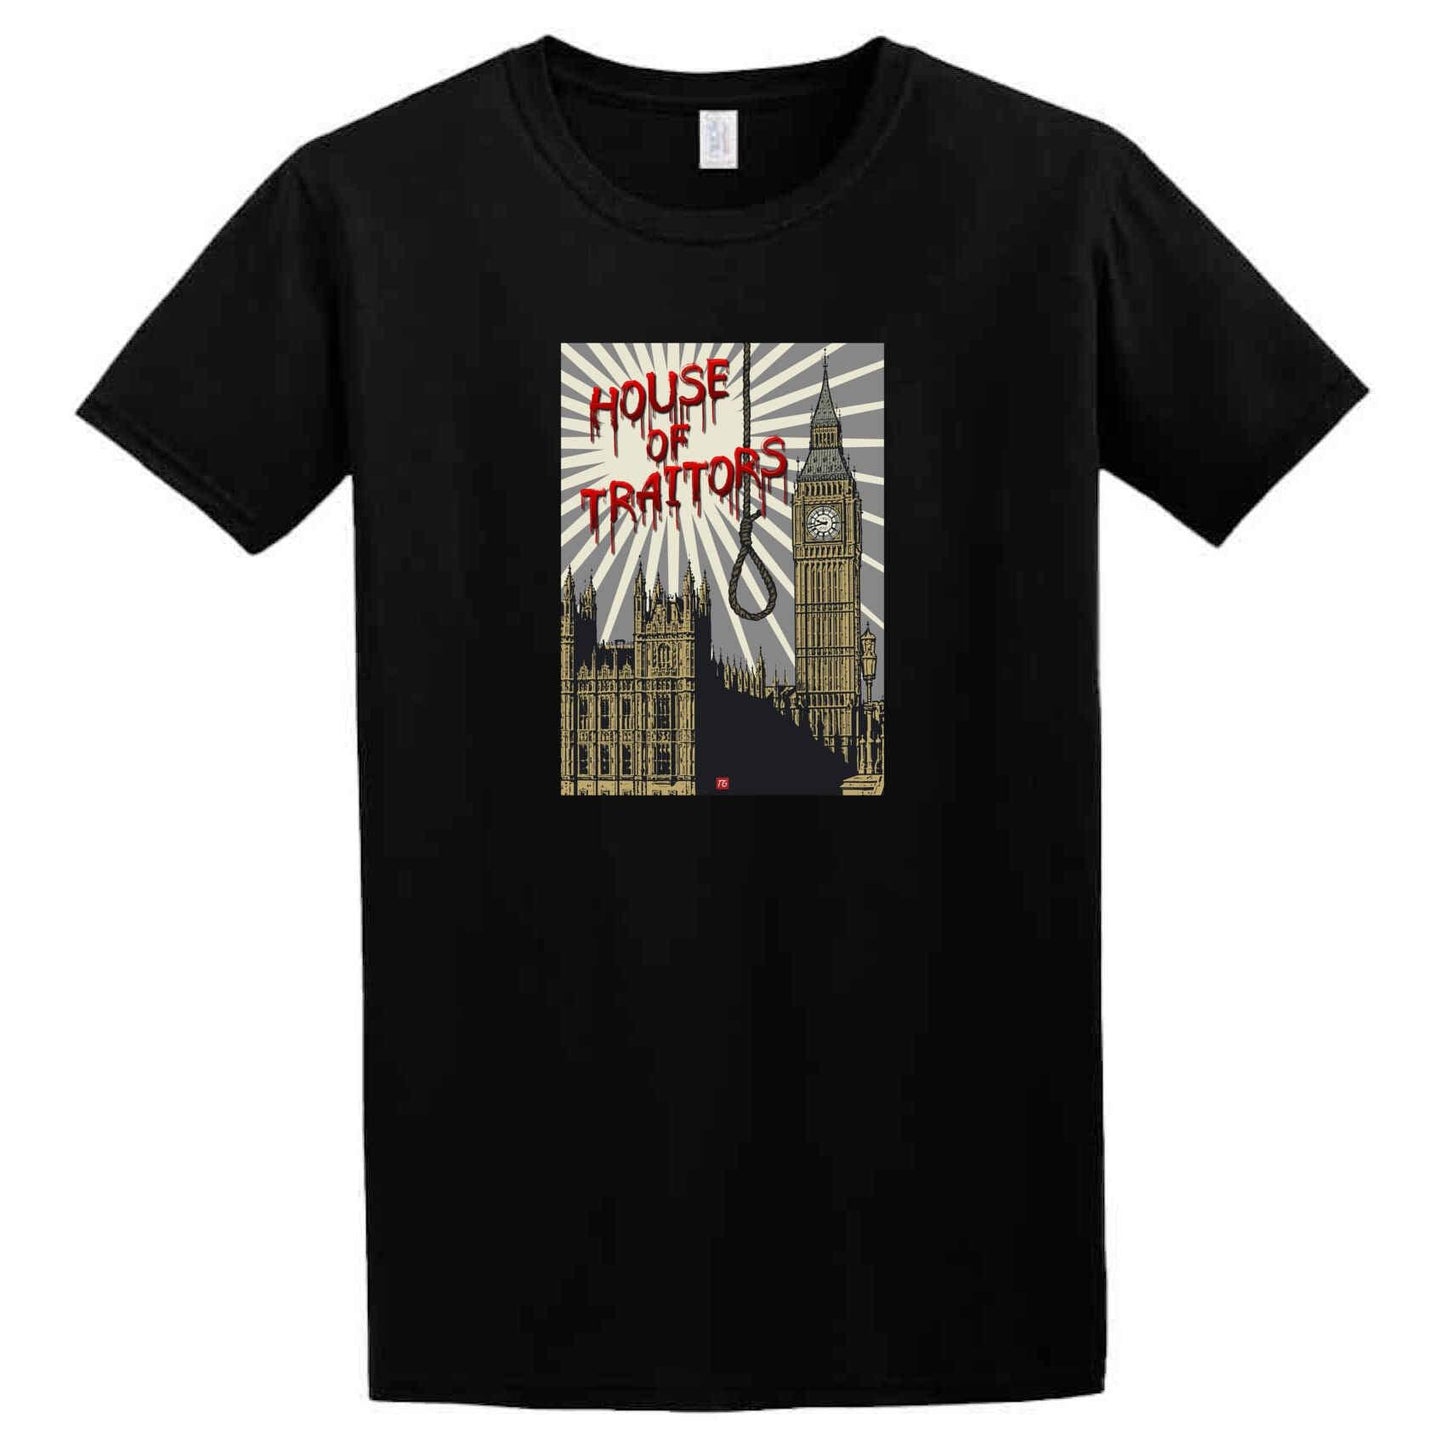 A Traitors T-Shirt with an image of london's big ben from Twisted Gifts.